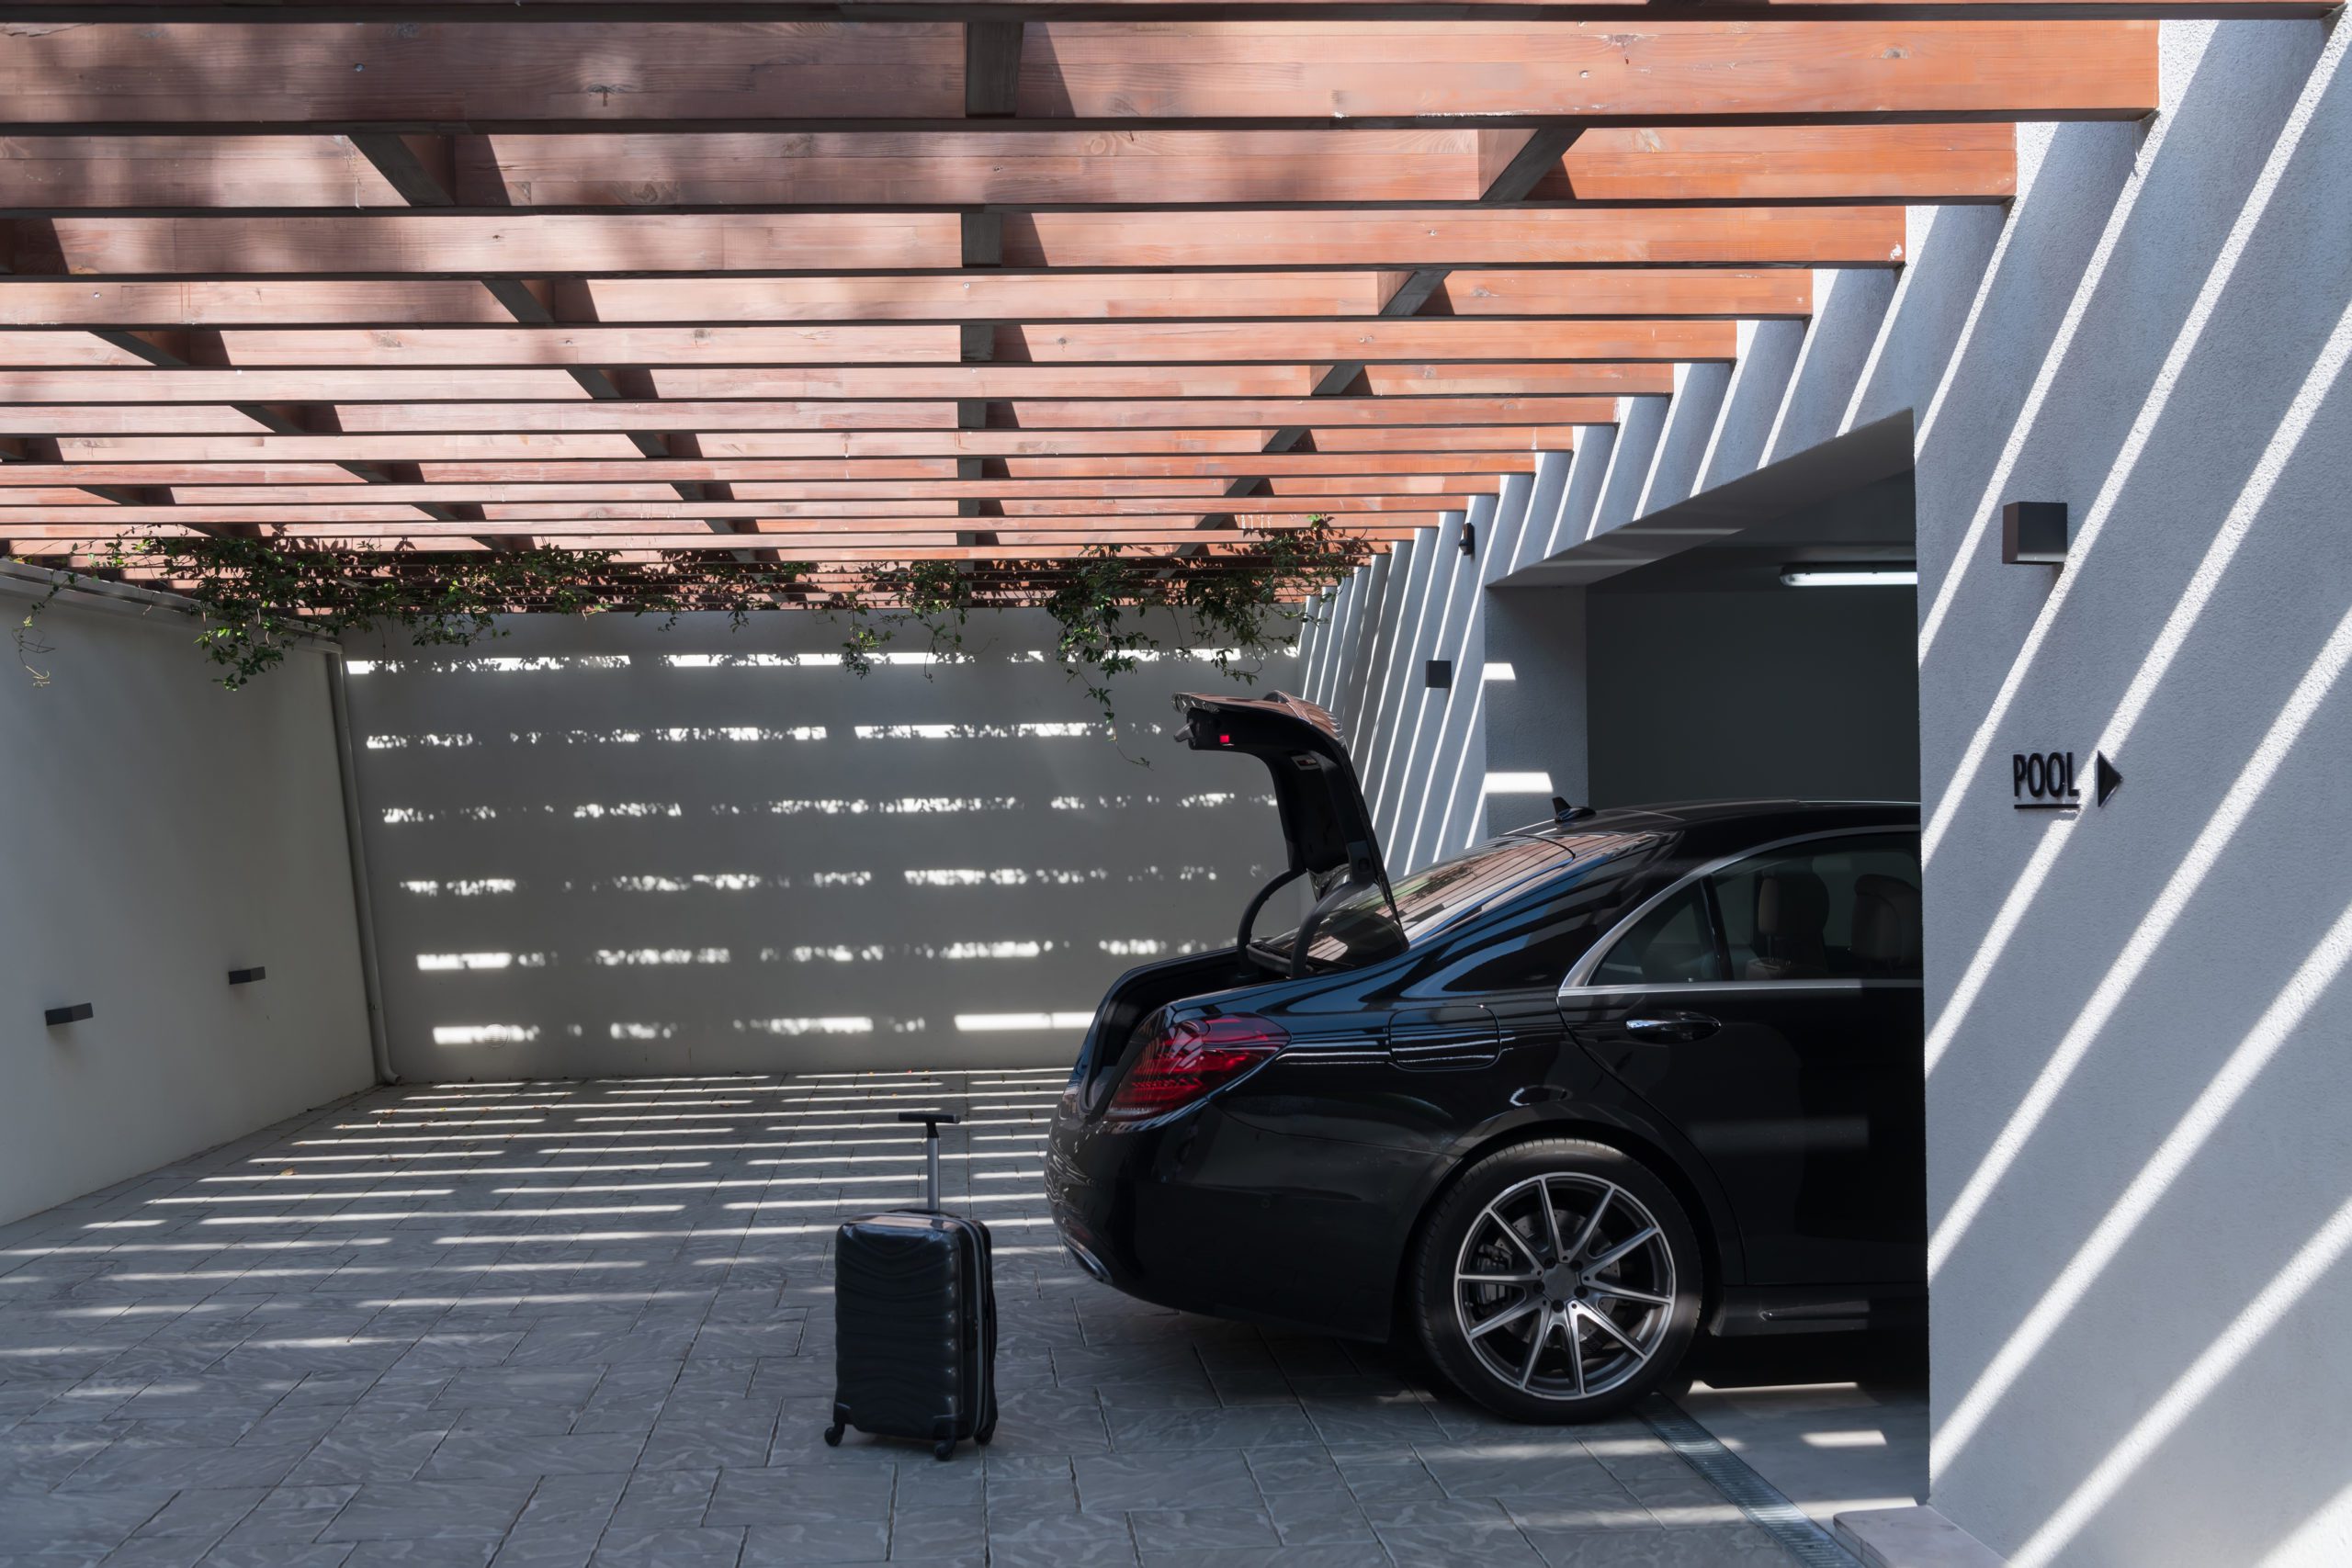 A photo of a suitcase standing next to a car in a luxury garage to illustrate How wide is a two-car garage